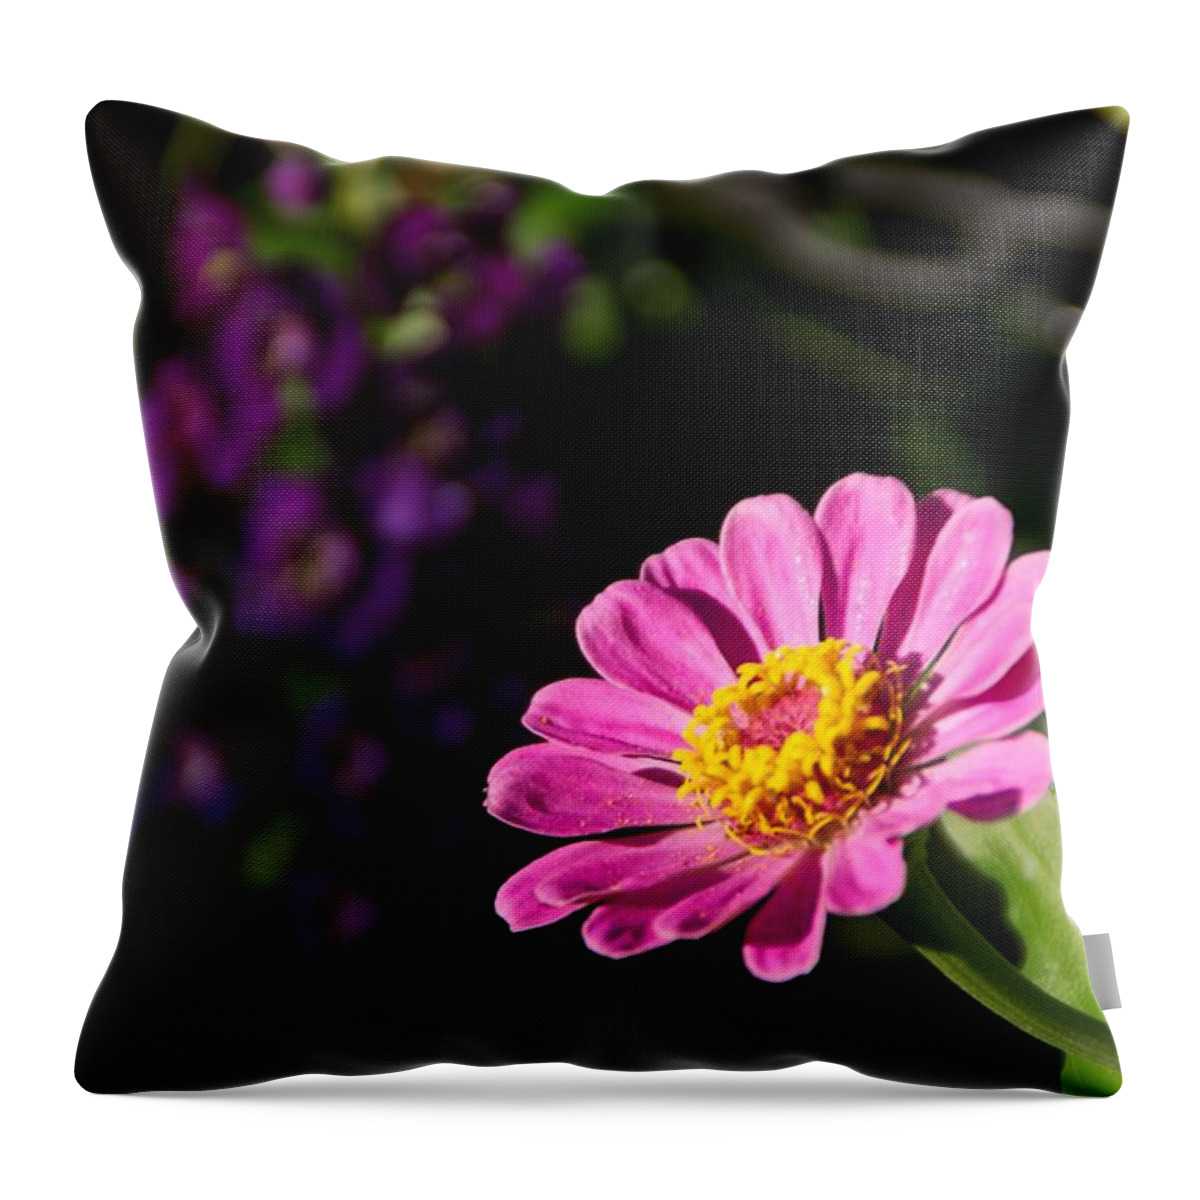 Magenta Throw Pillow featuring the photograph Magenta Flower by Toni Berry